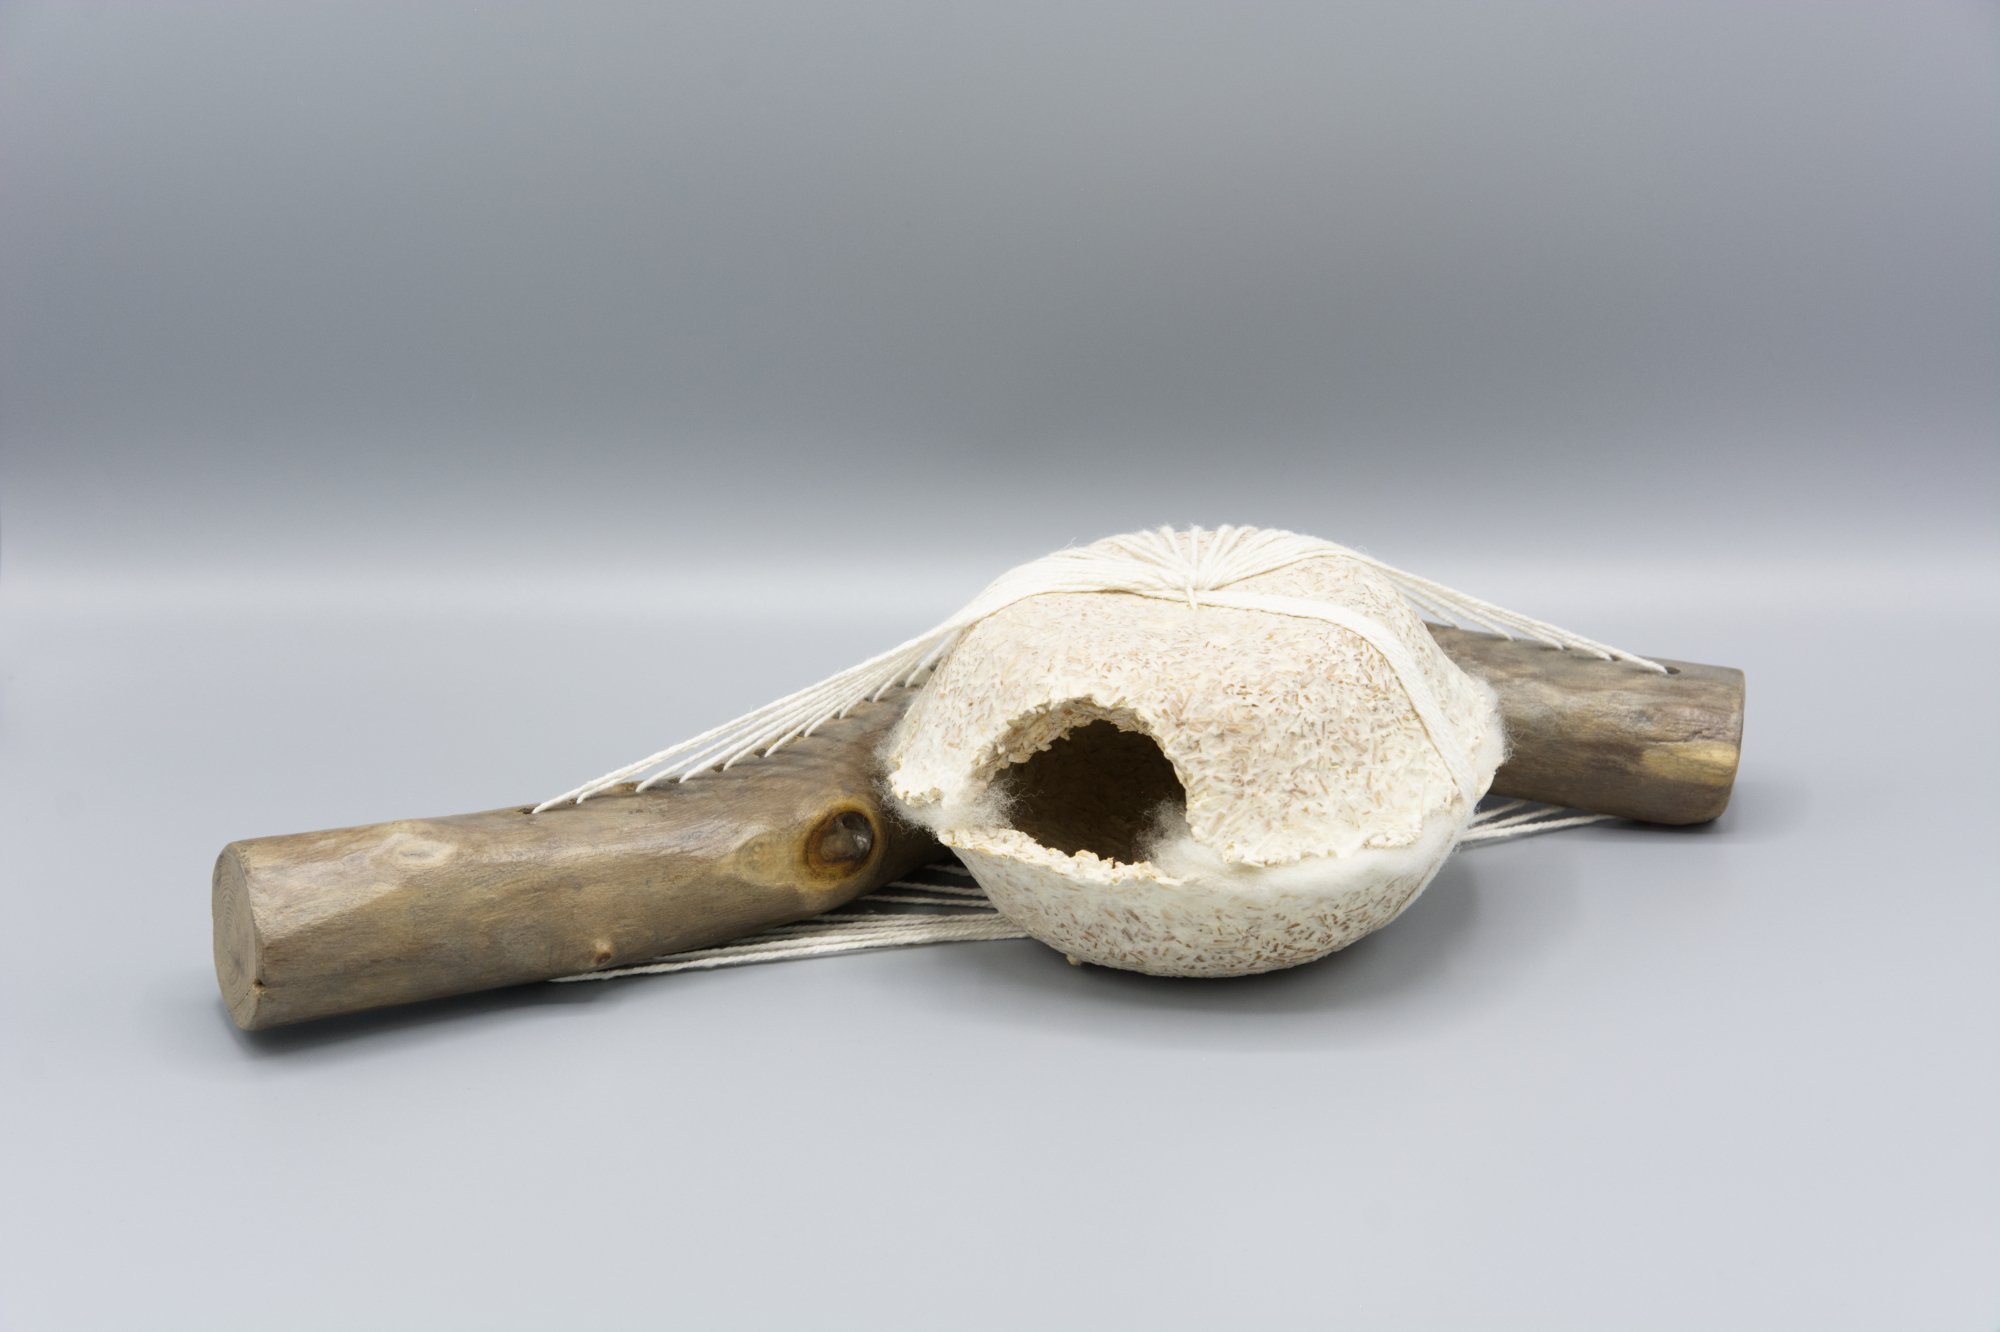  Kelly M O’Brien,  Re:matter . Foraged wood, cast mycelium, wool, cotton cord. 3 x 14 x 7 inches. ©2023 